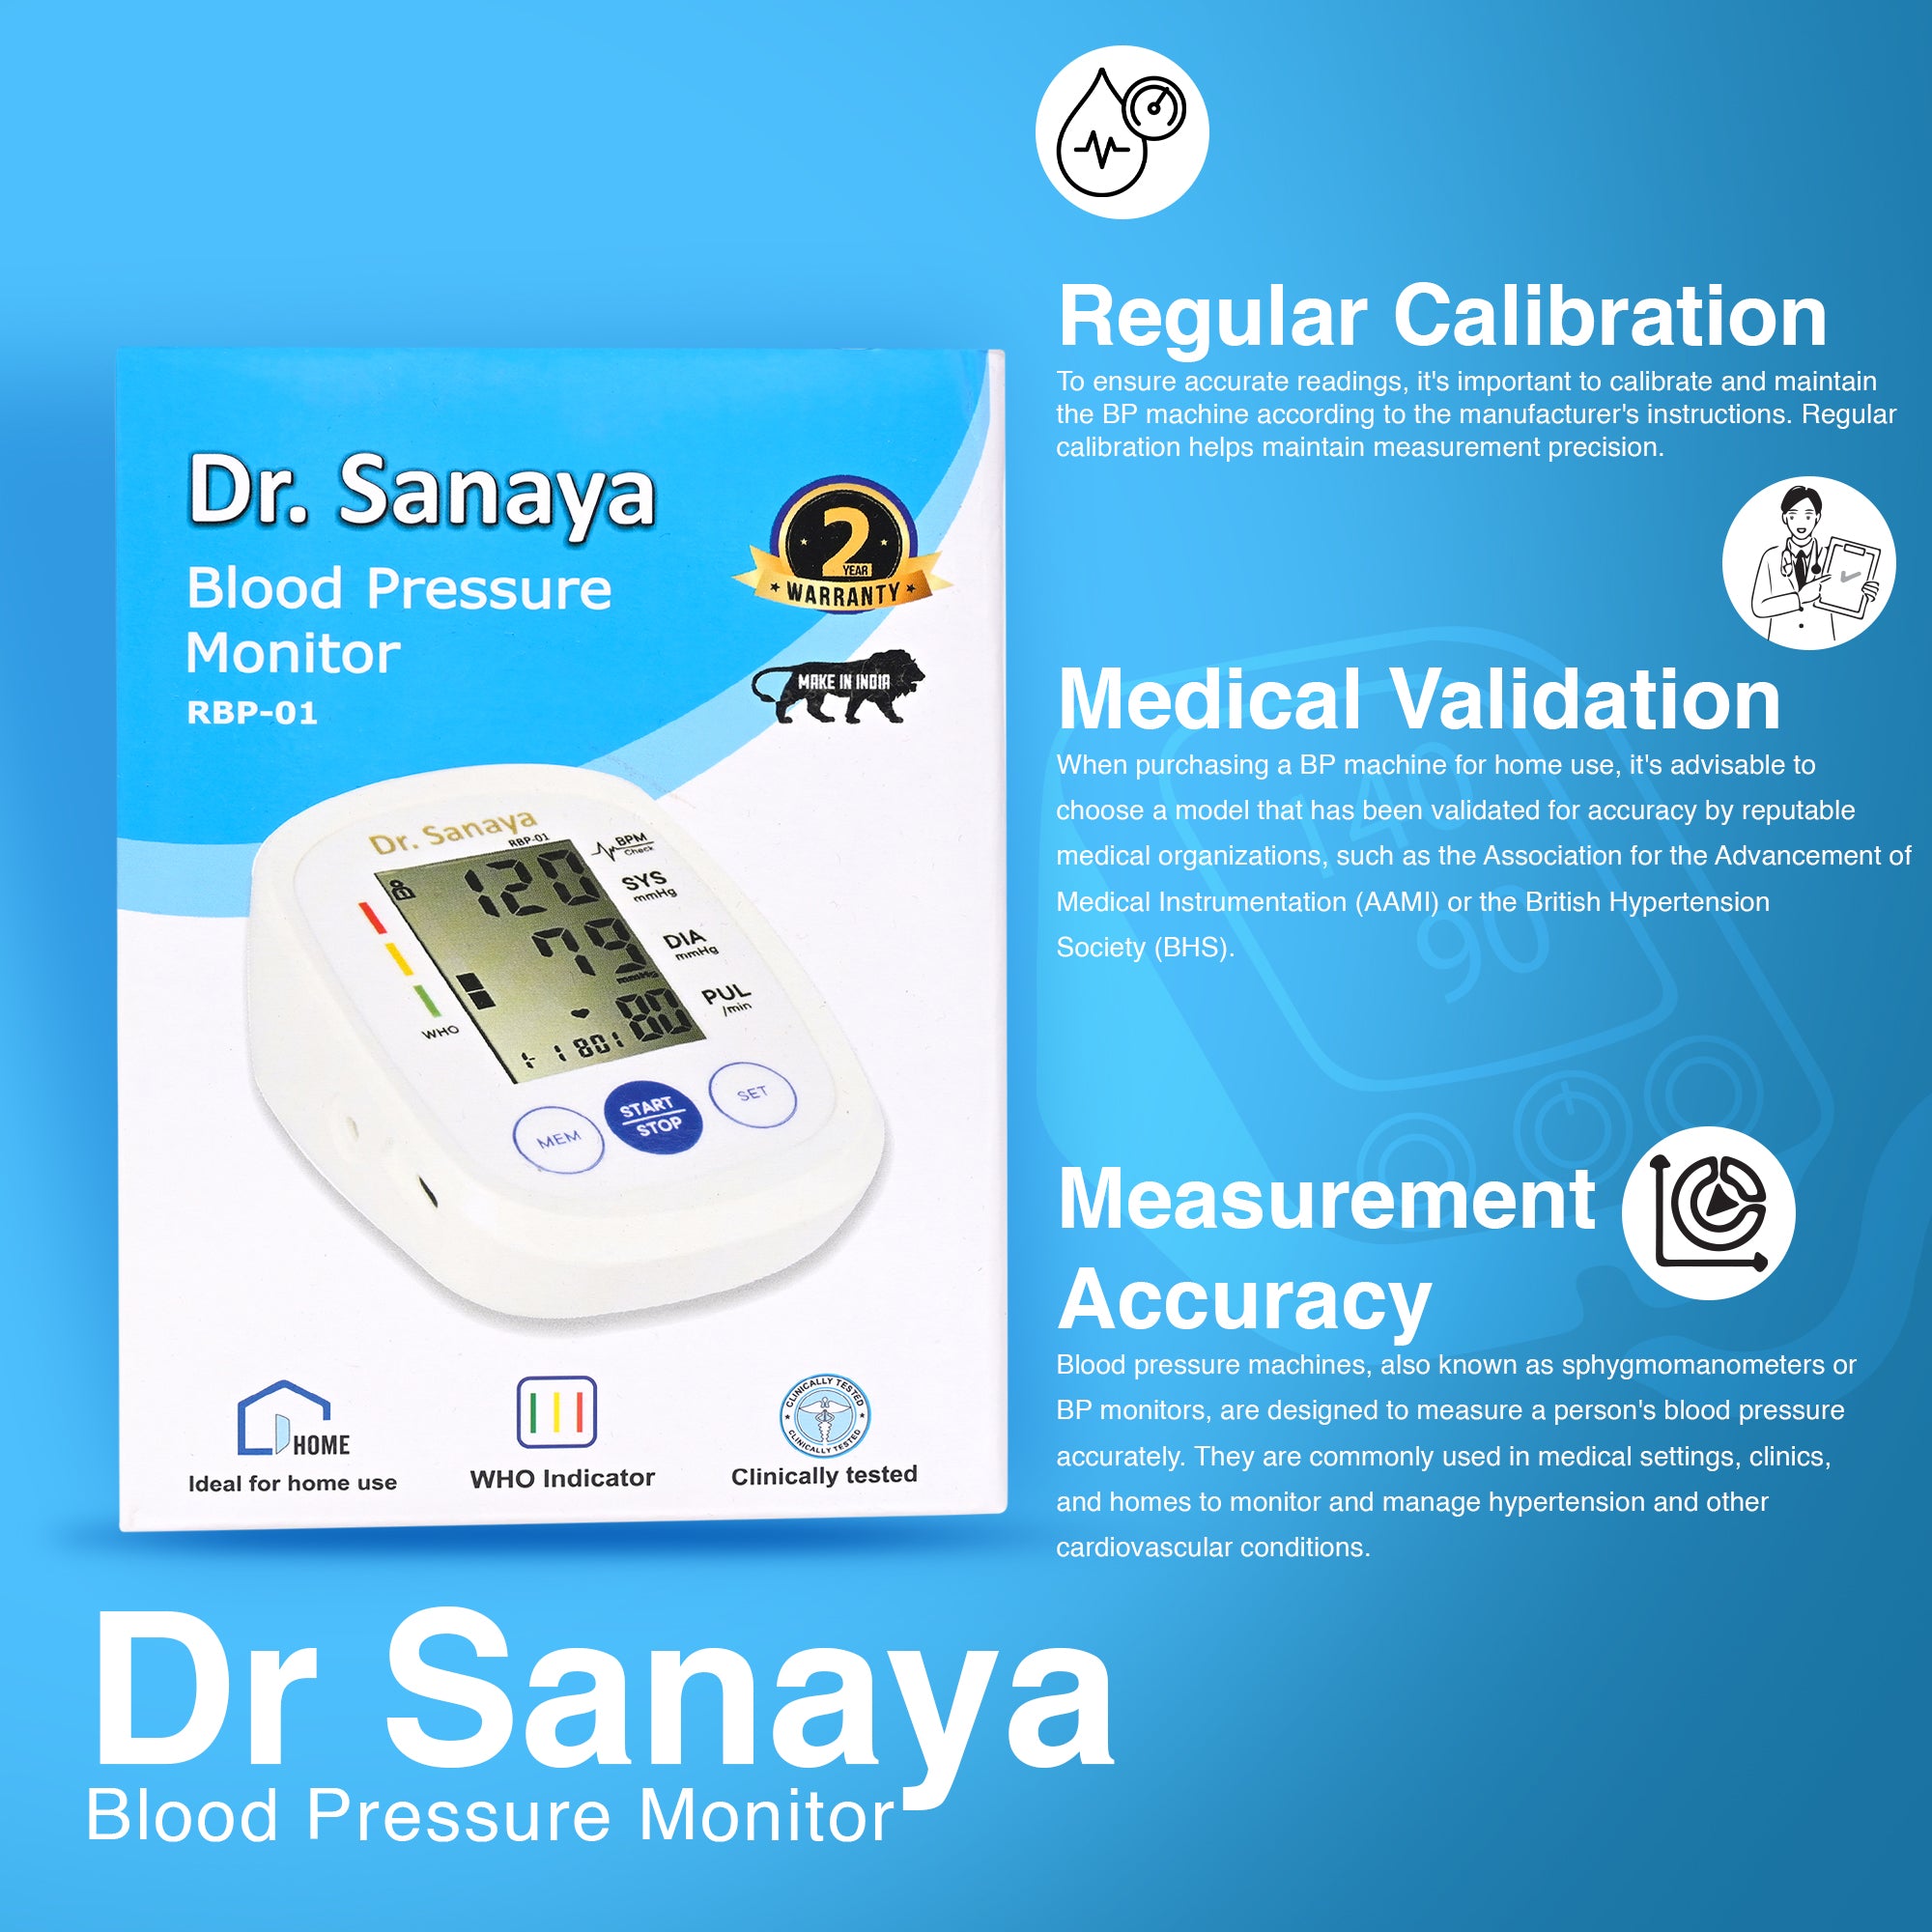 Dr. Sanaya Fully Automatic Digital Blood Pressure Monitor with C-Type USB Port,Cuff Size(Arm Circumference 22-36 Cm) and Most Accurate Measurement Bp Monitor (White)